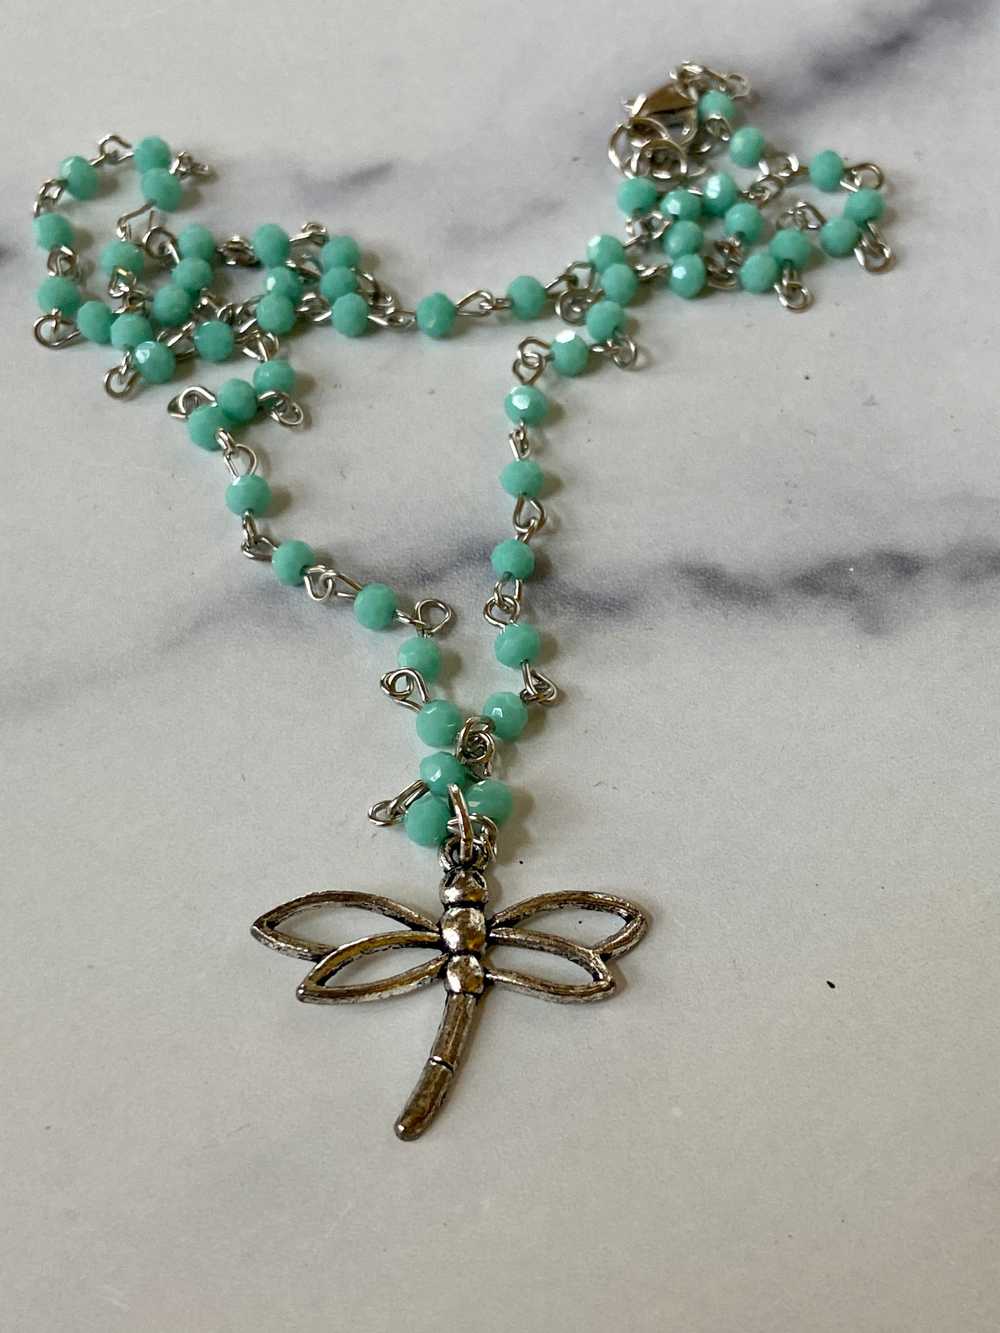 Dragonfly necklace - image 1